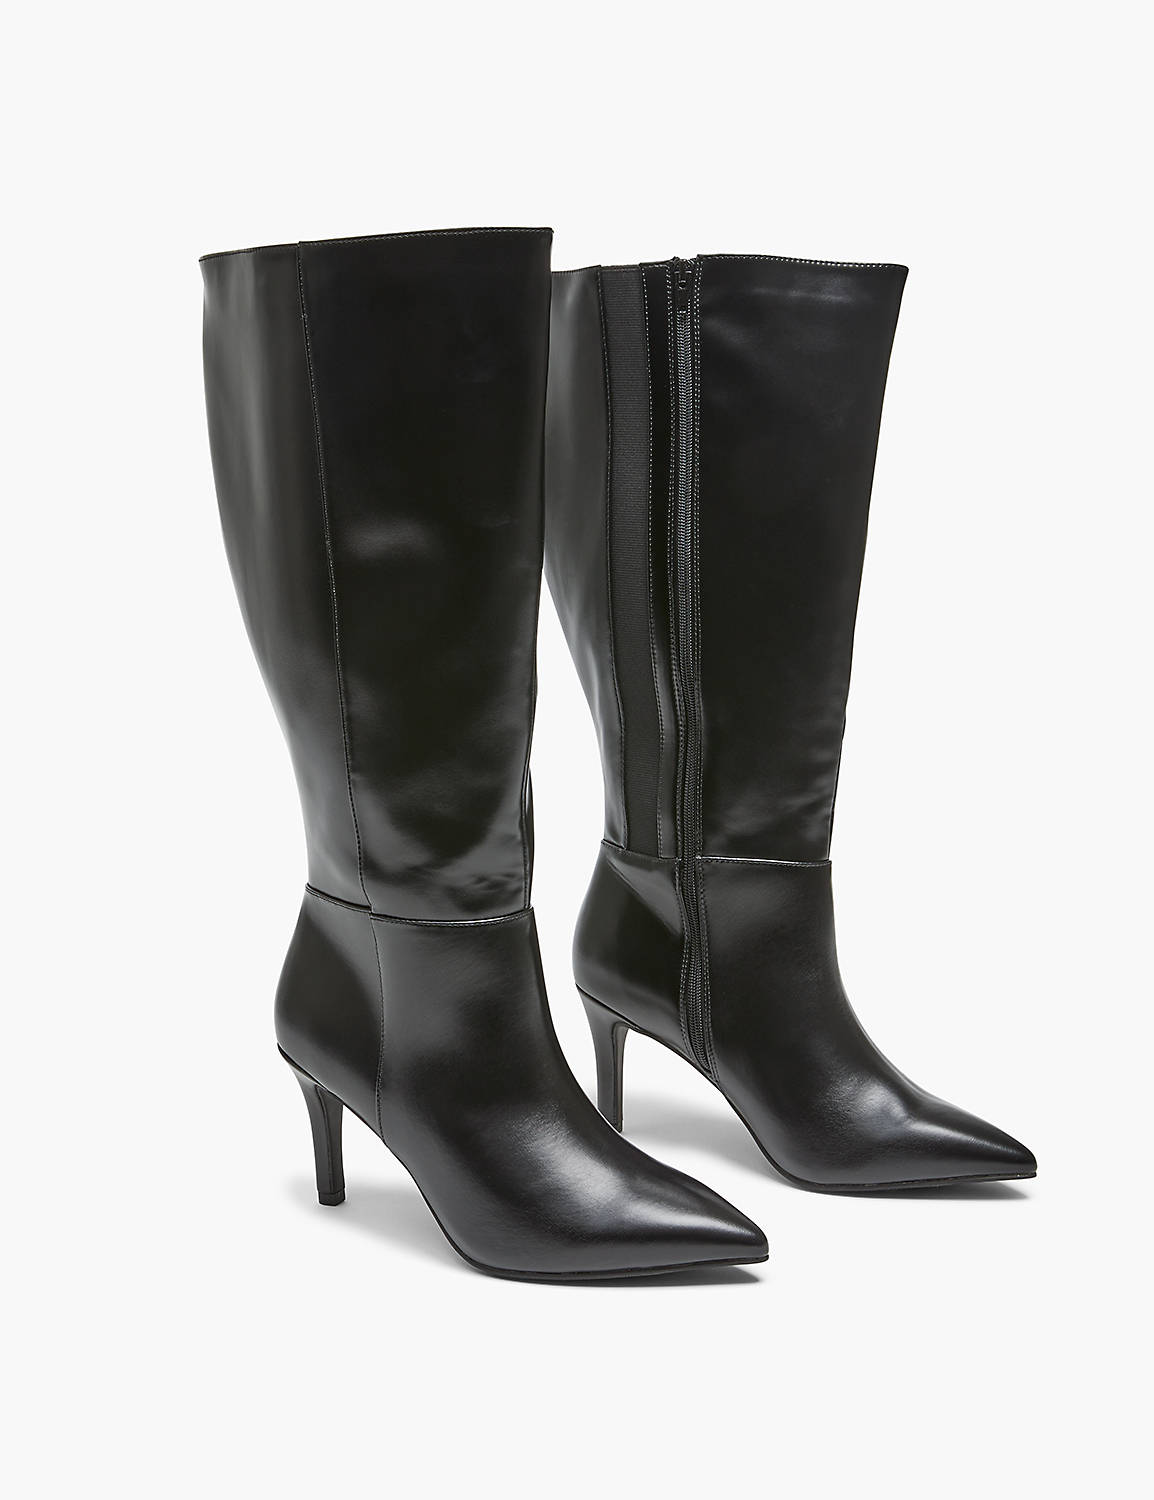 lane bryant dream cloud faux-leather pointed-toe tall boot 12ew black